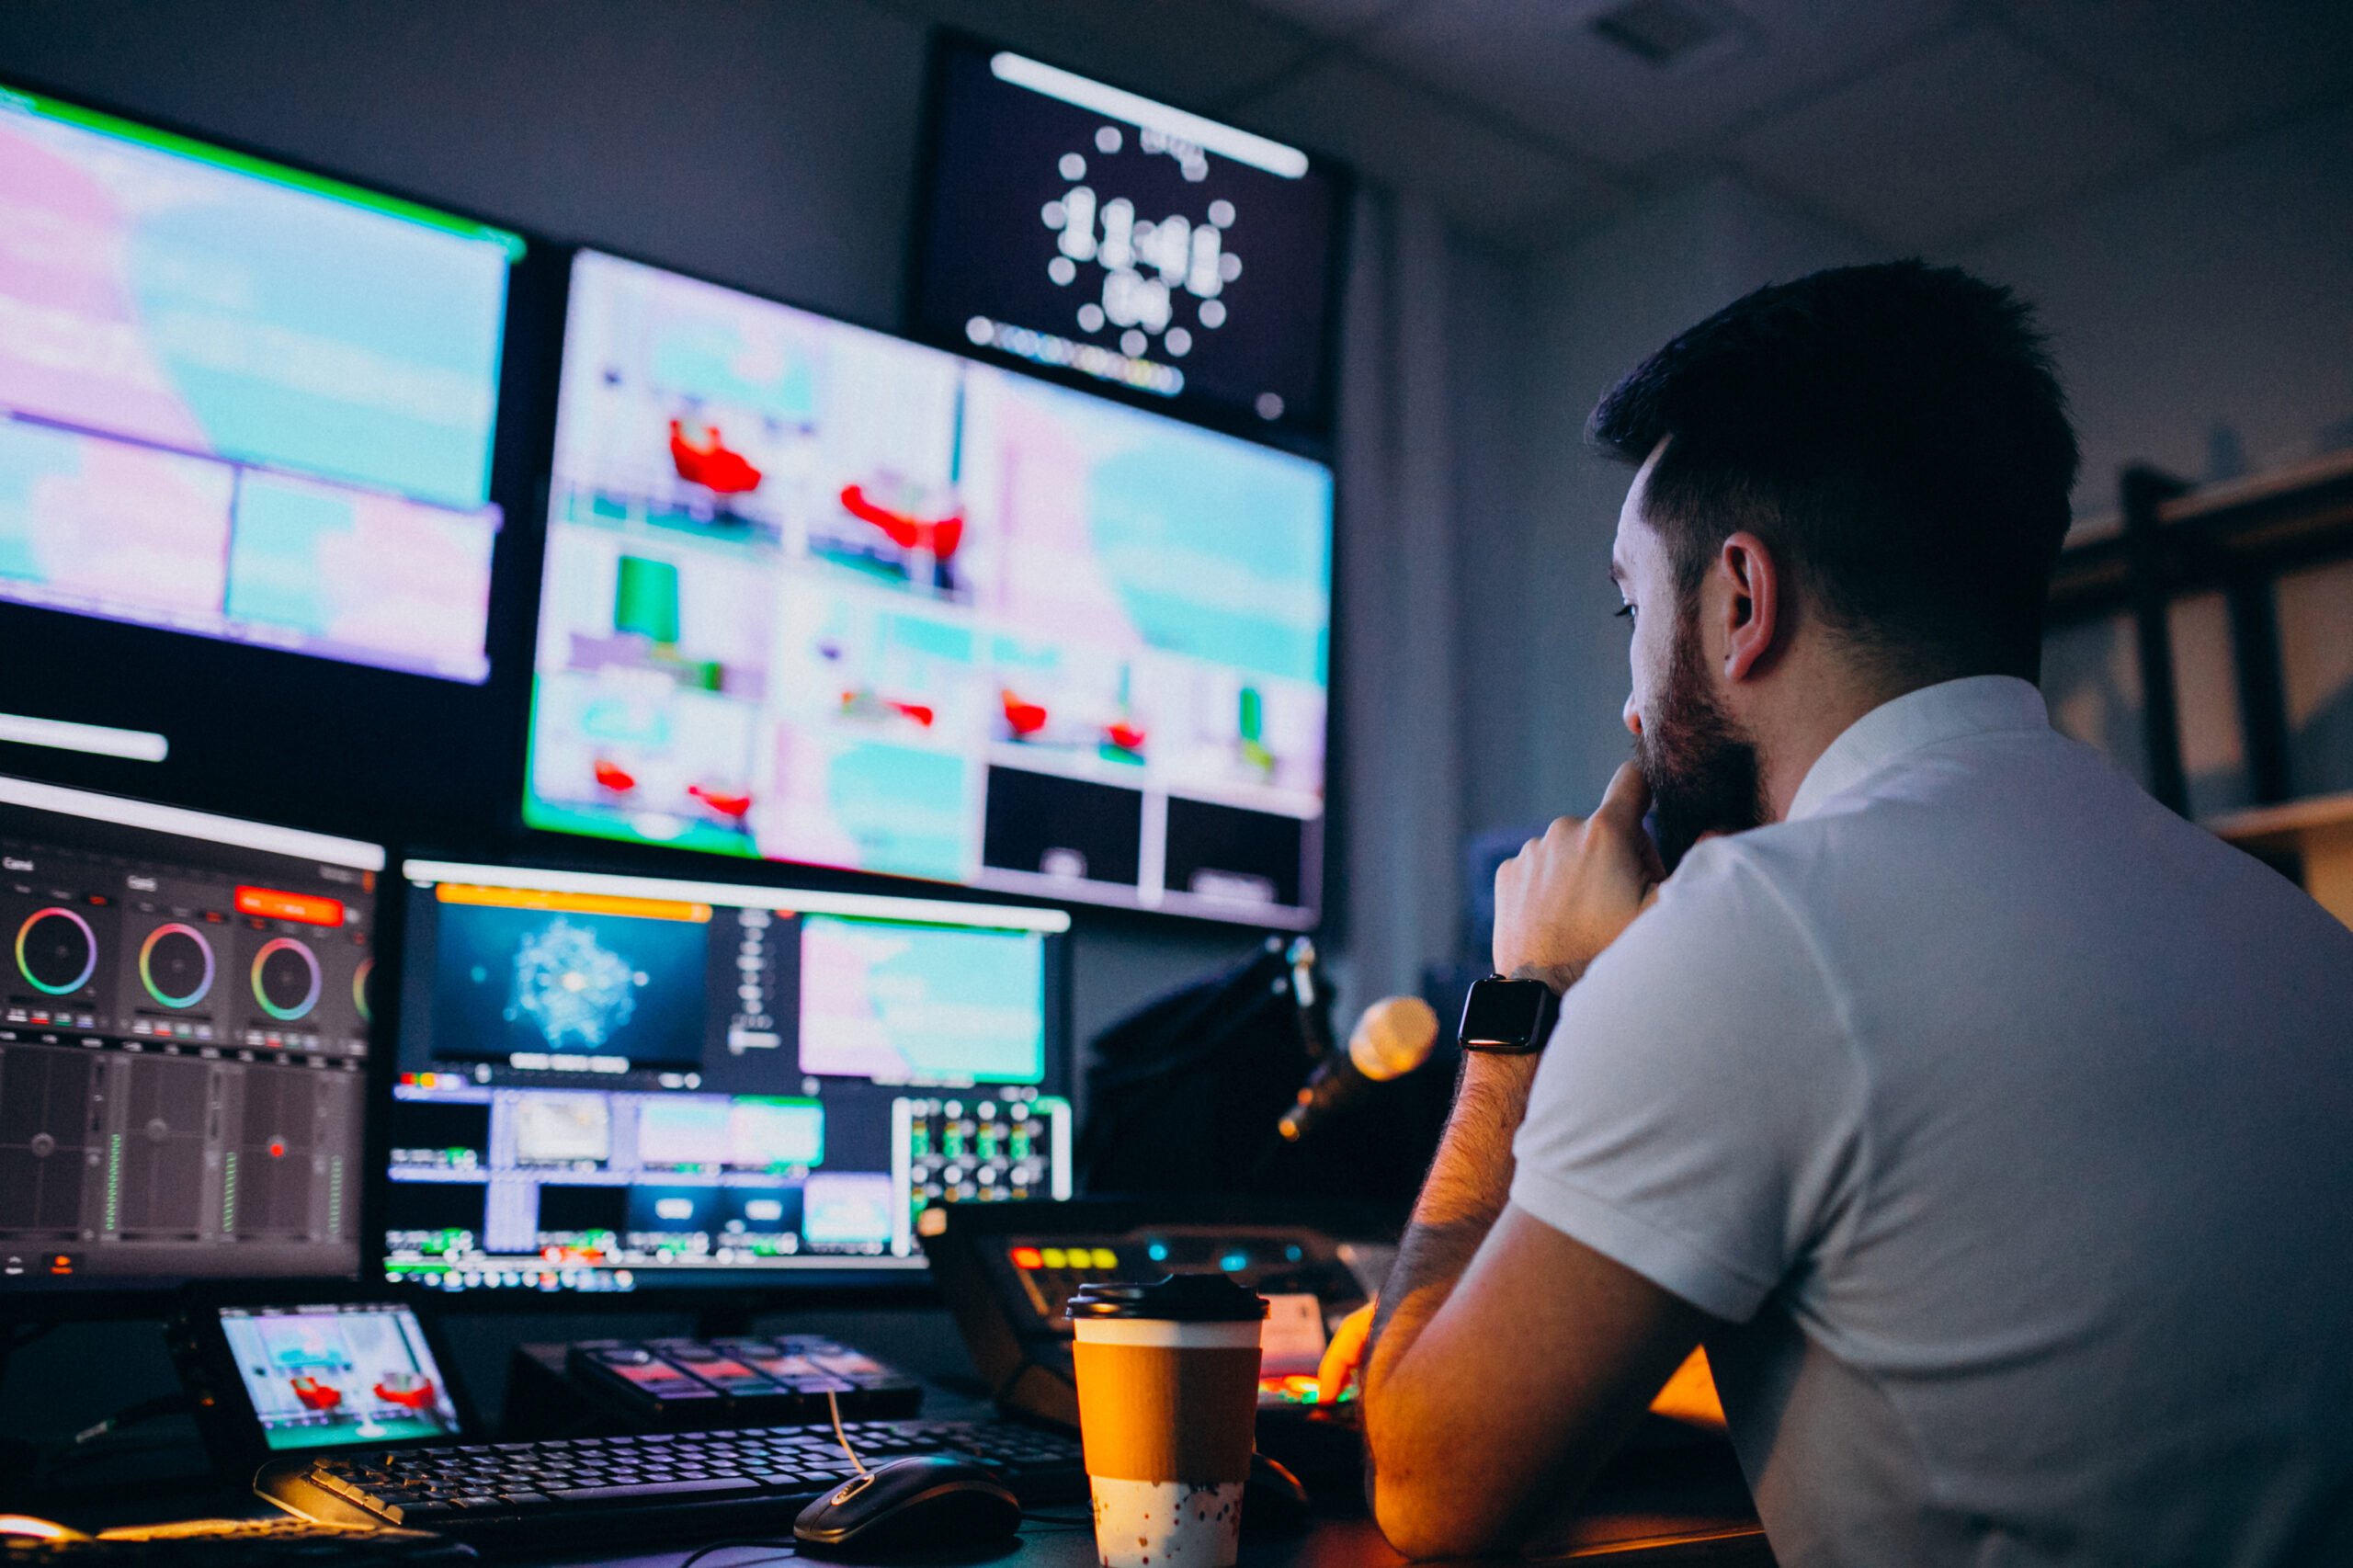 Streaming Infrastructure Hire & Support, Video production, video services, video equipment rental, videographer, video editing, video marketing,marketing video